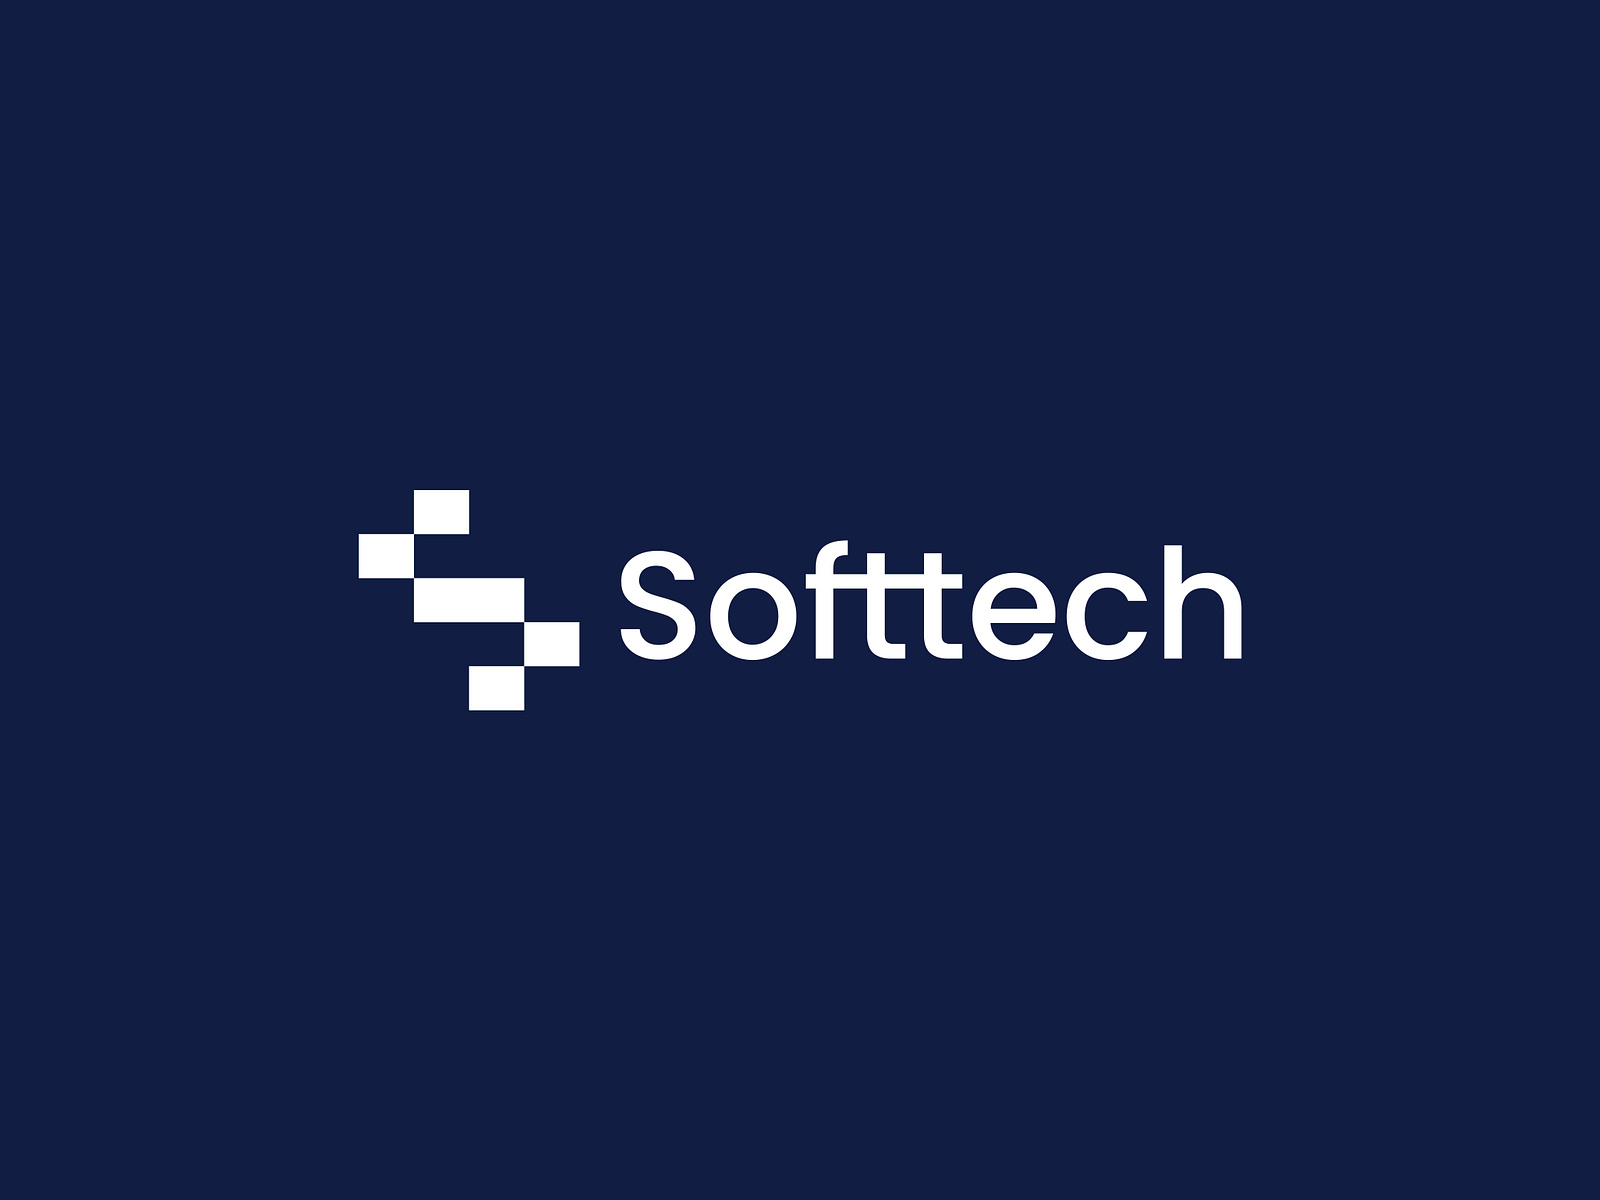 Softtech - Brand Tech Logo Design by Anisul Haque on Dribbble